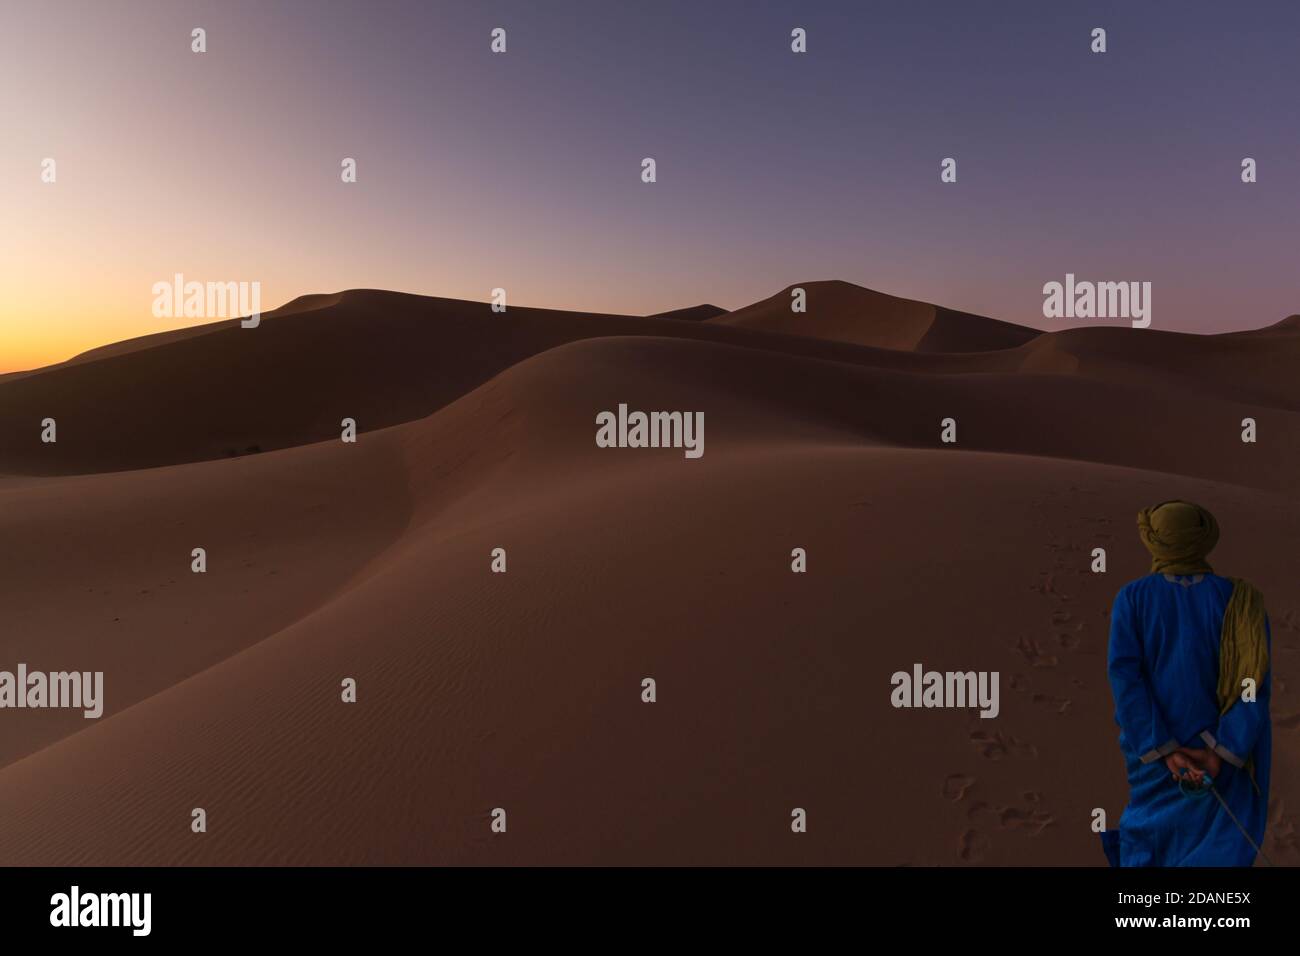 Unrecognizable Berber man walking on a dreamy desert at Twilight of dawn. Desert dune of Erg Chigaga, at the gates of the Sahara. Morocco. Concept of Stock Photo